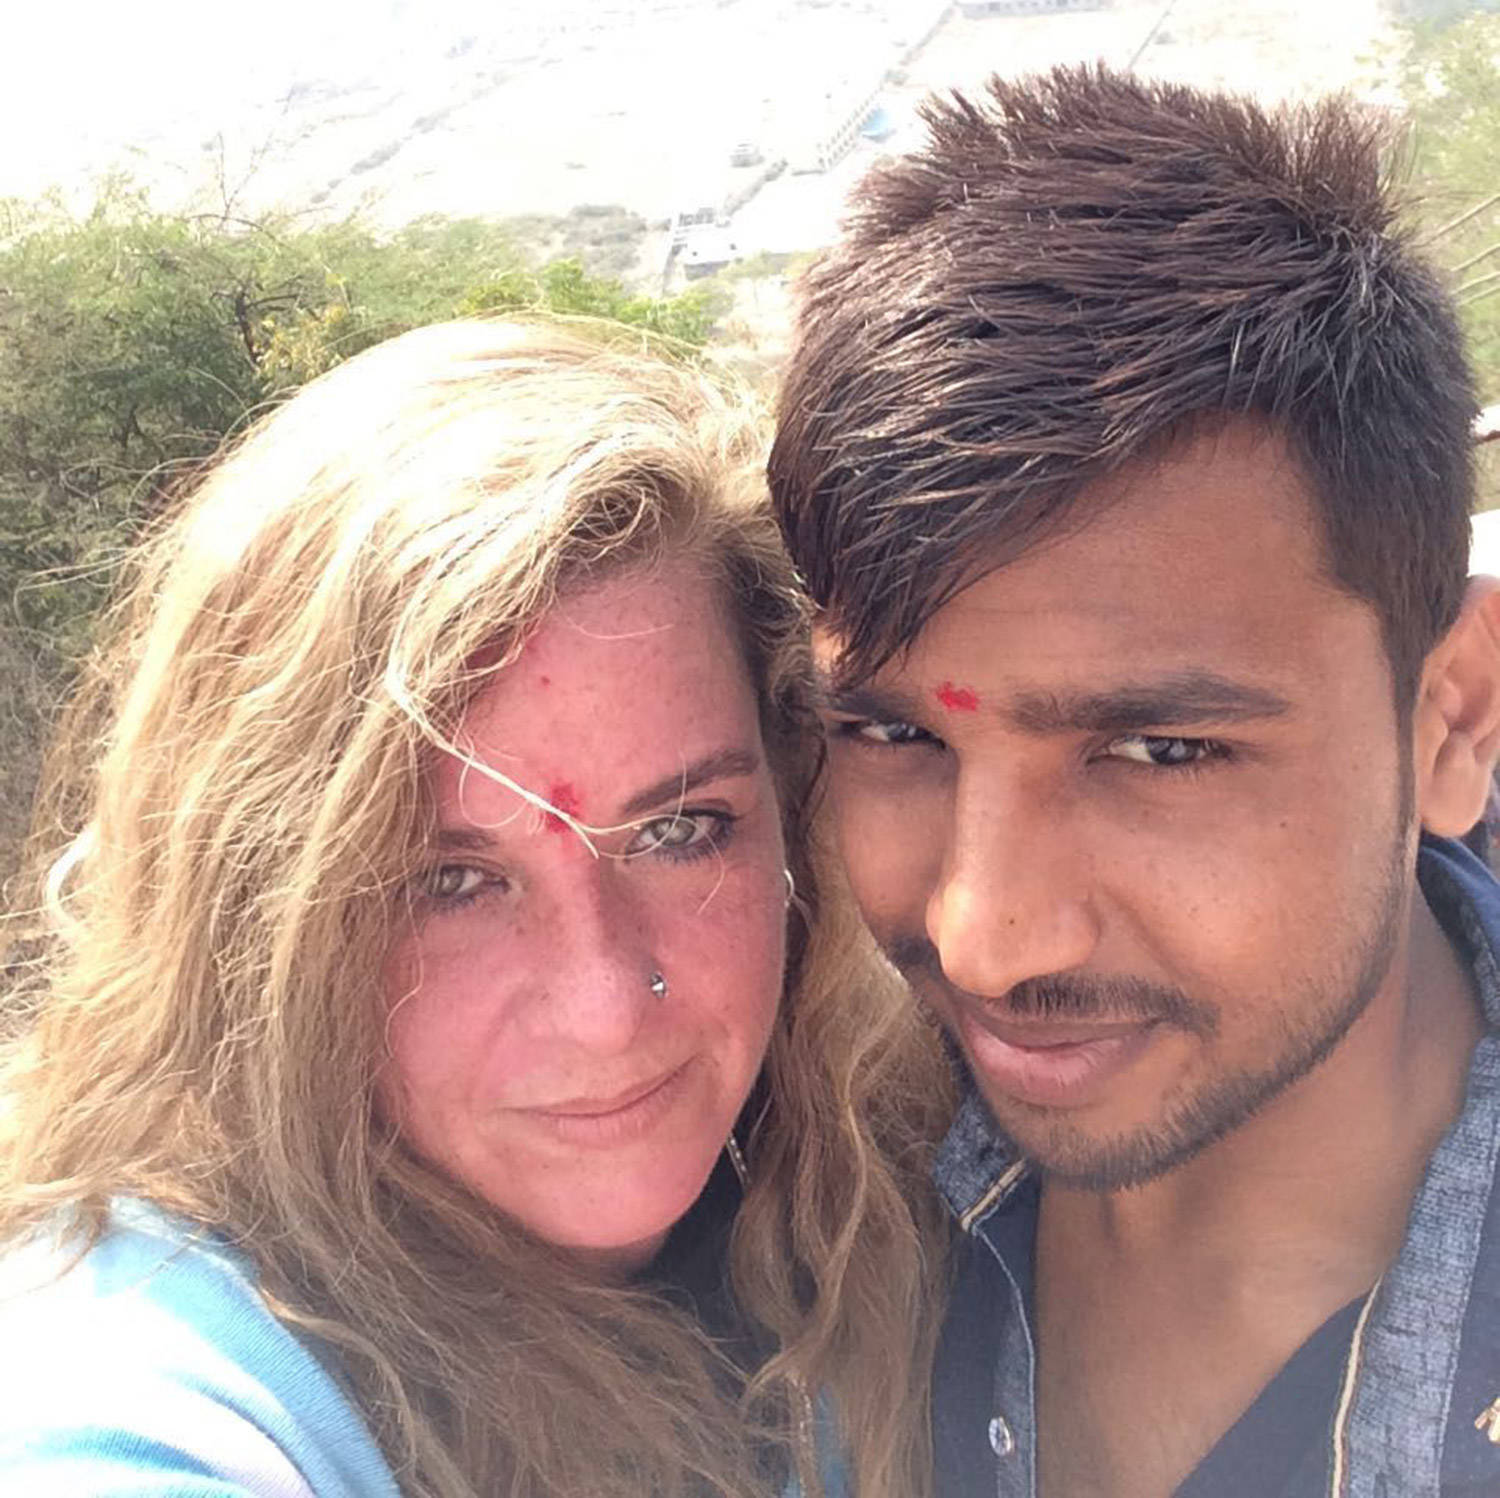 Meet The 41 Year Old American Woman Who Married A 23 Year Old Ahmedabad Slum Dweller Business 